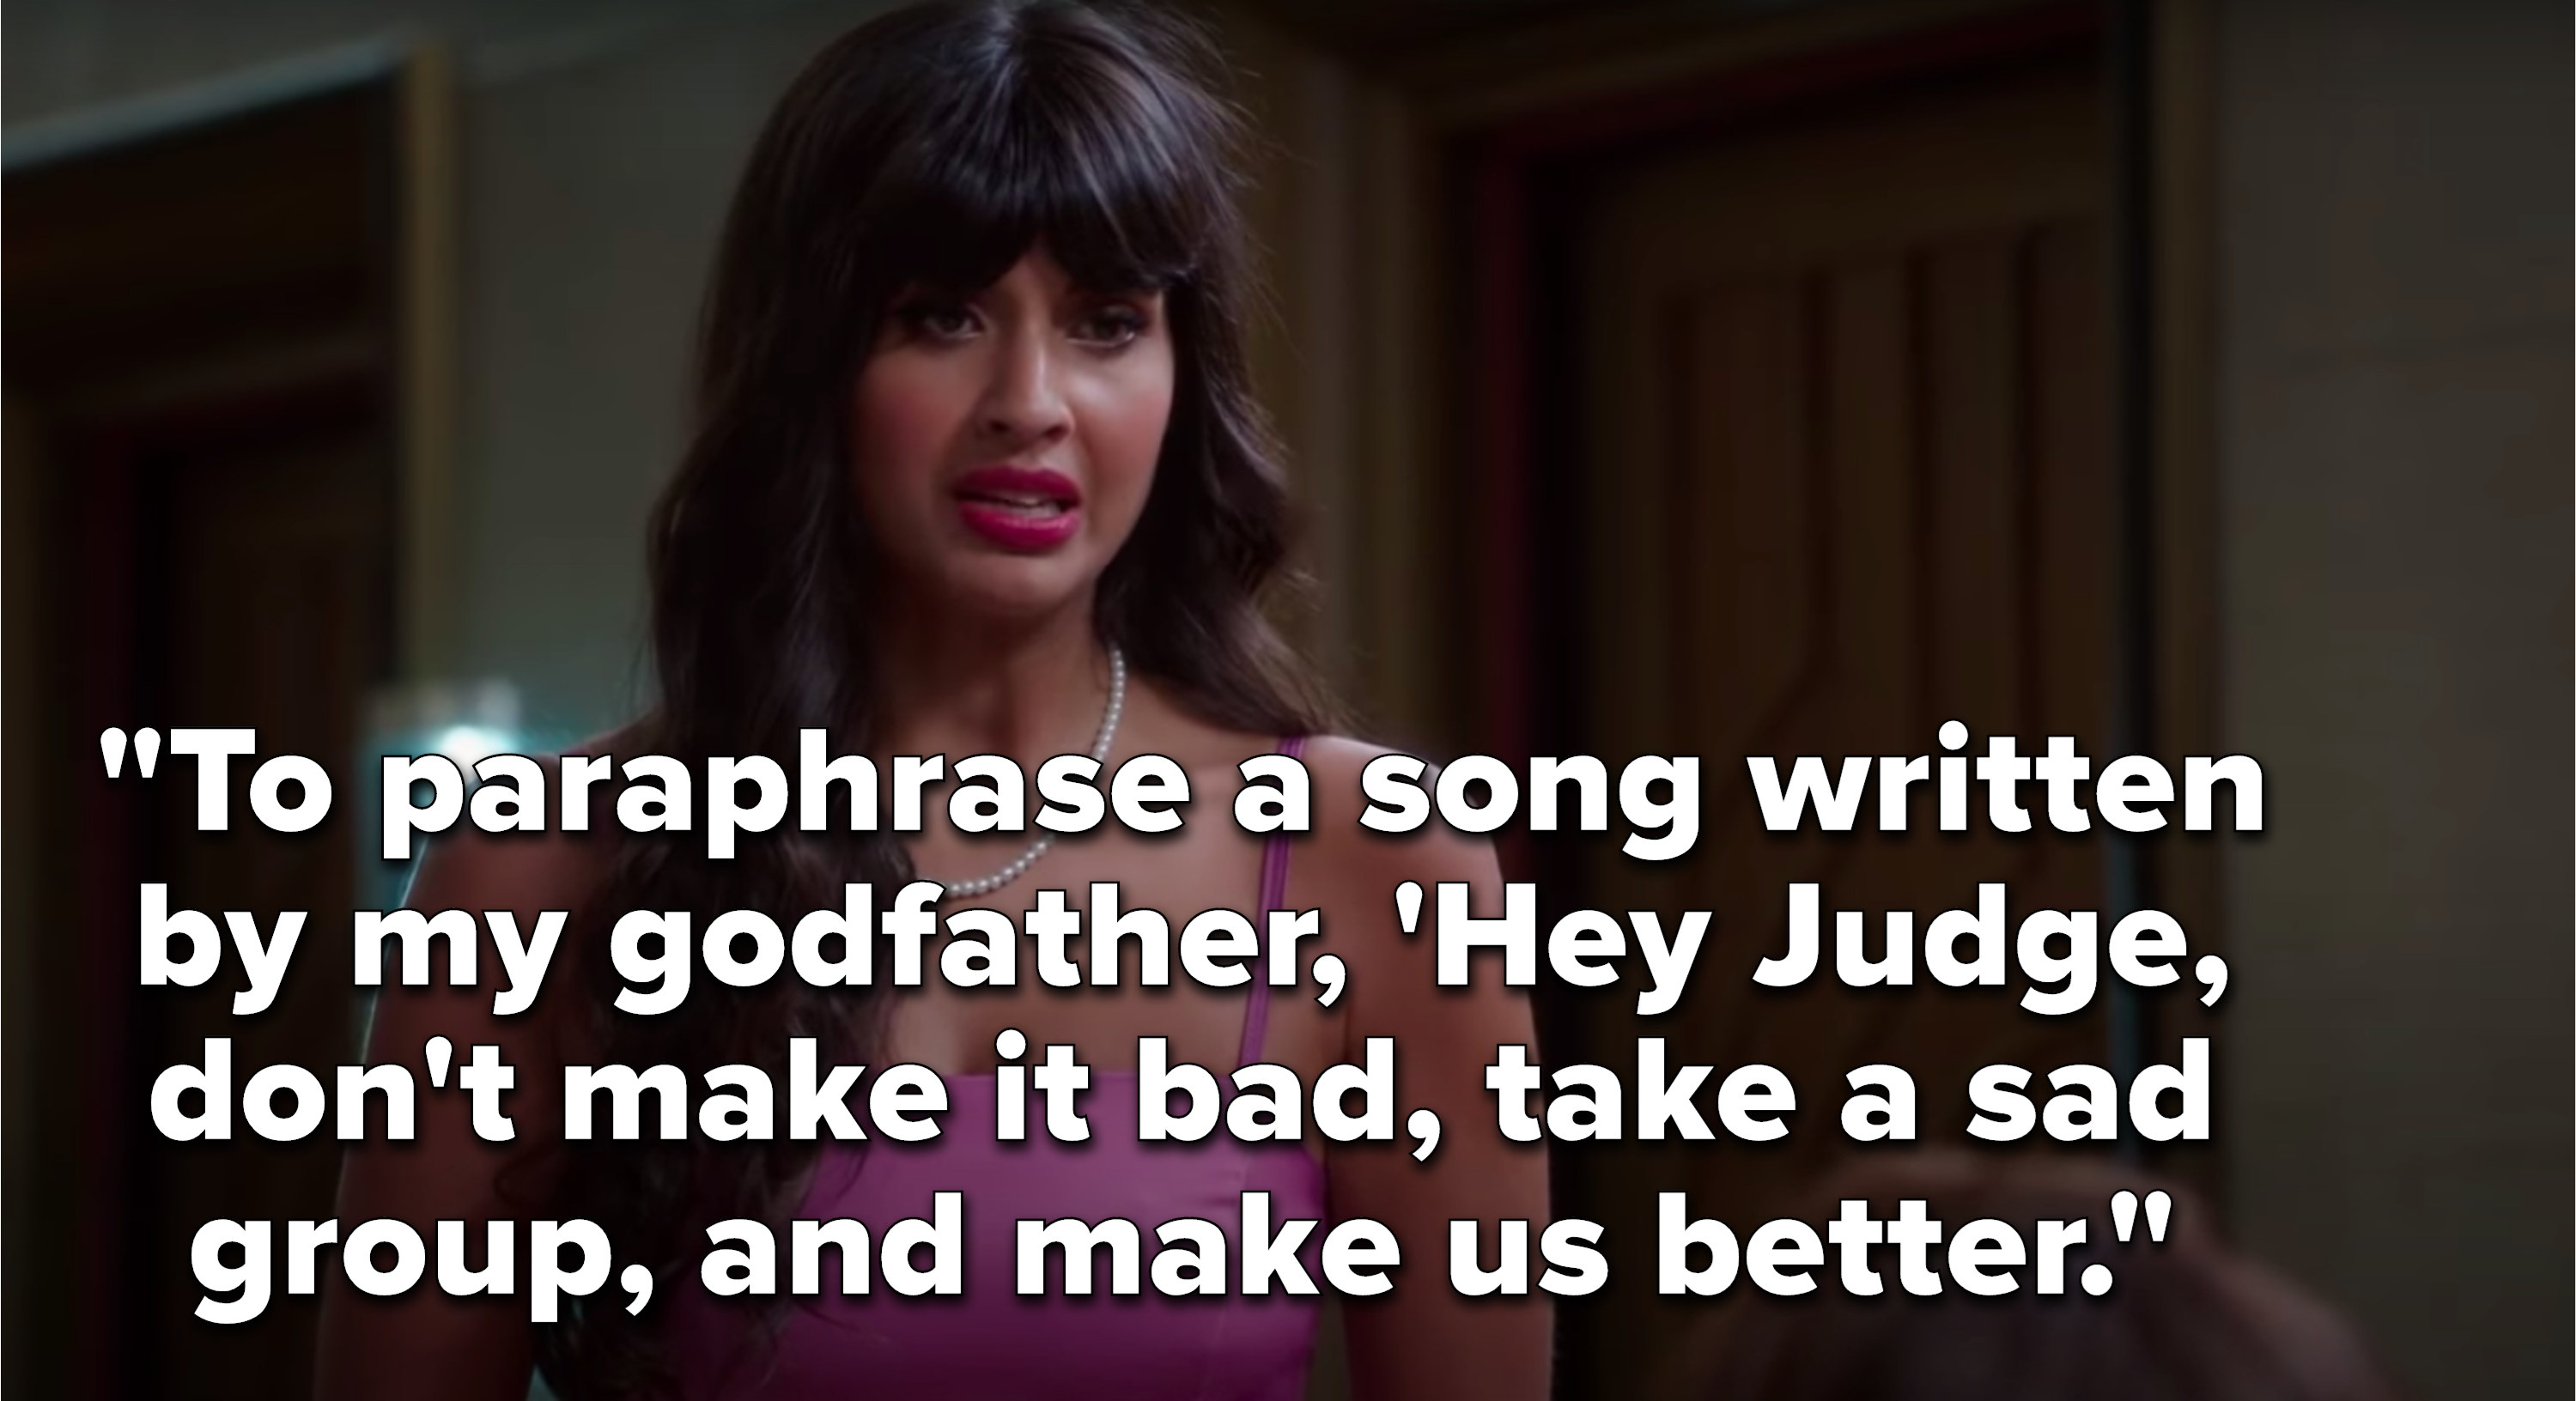 Tahani says, To paraphrase a song written by my godfather, Hey Judge, don&#x27;t make it bad, take a sad group, and make us better